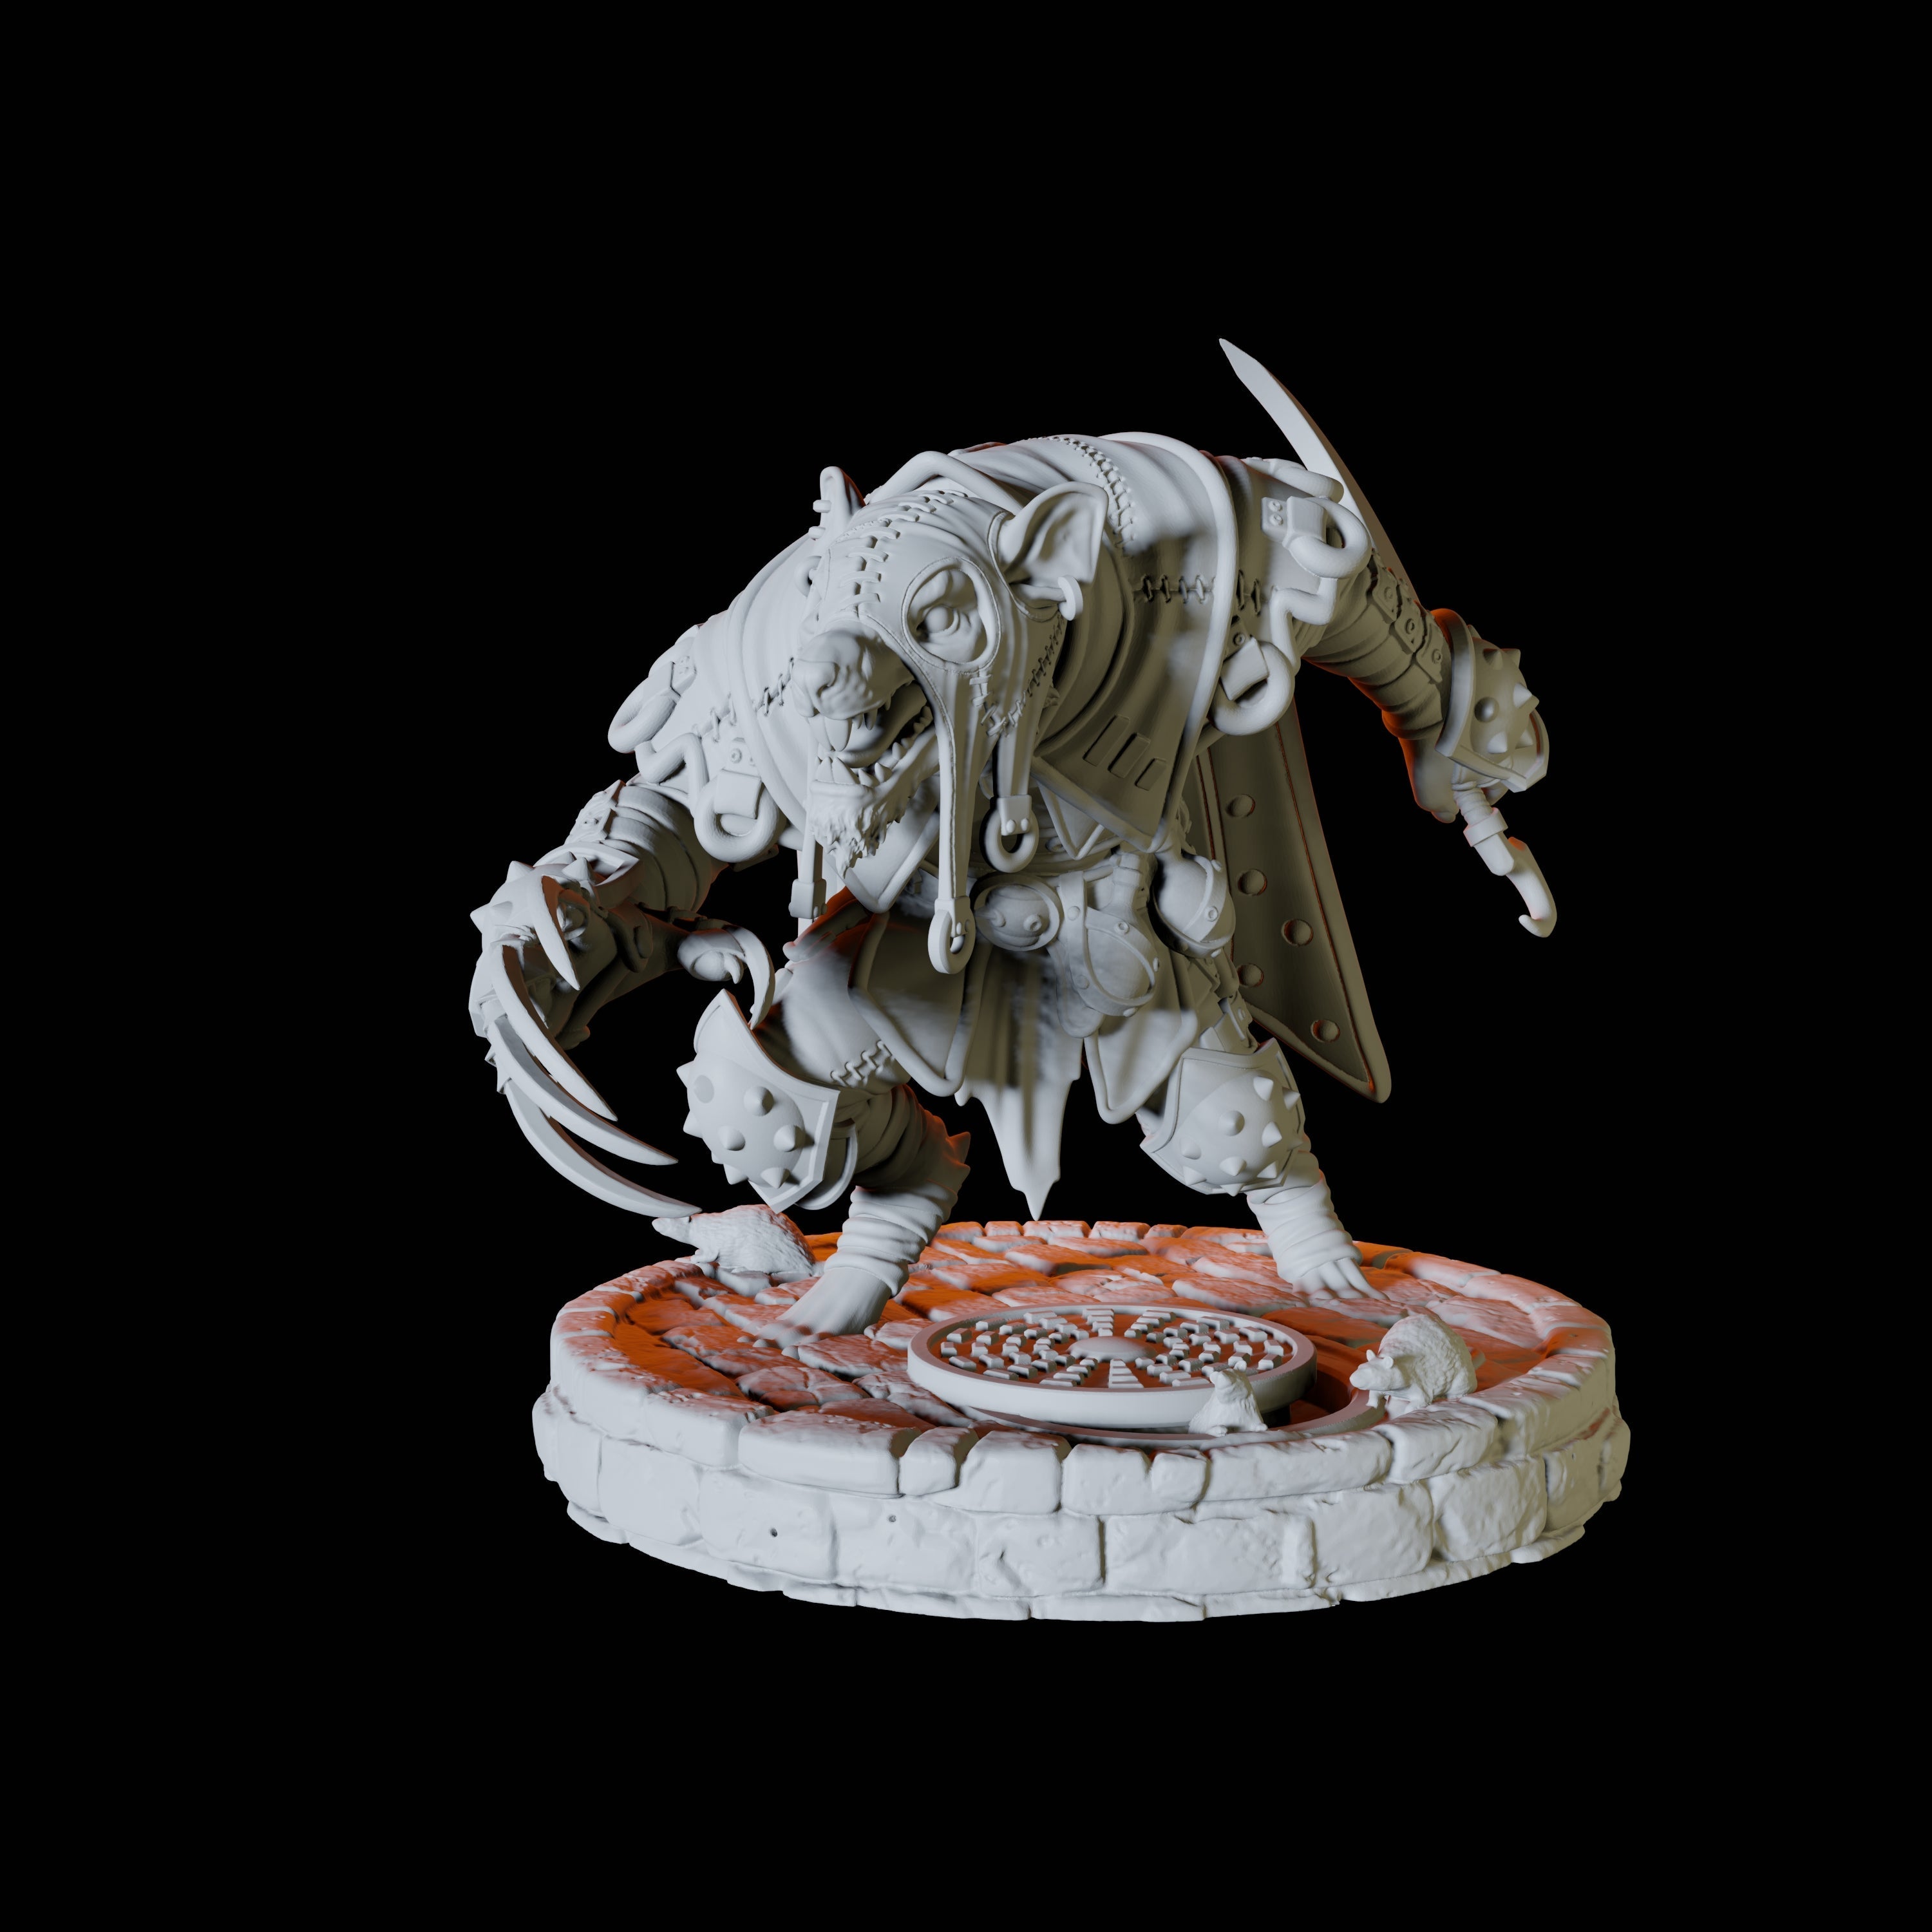 Ratfolk Assassin D Miniature for Dungeons and Dragons, Pathfinder or other TTRPGs